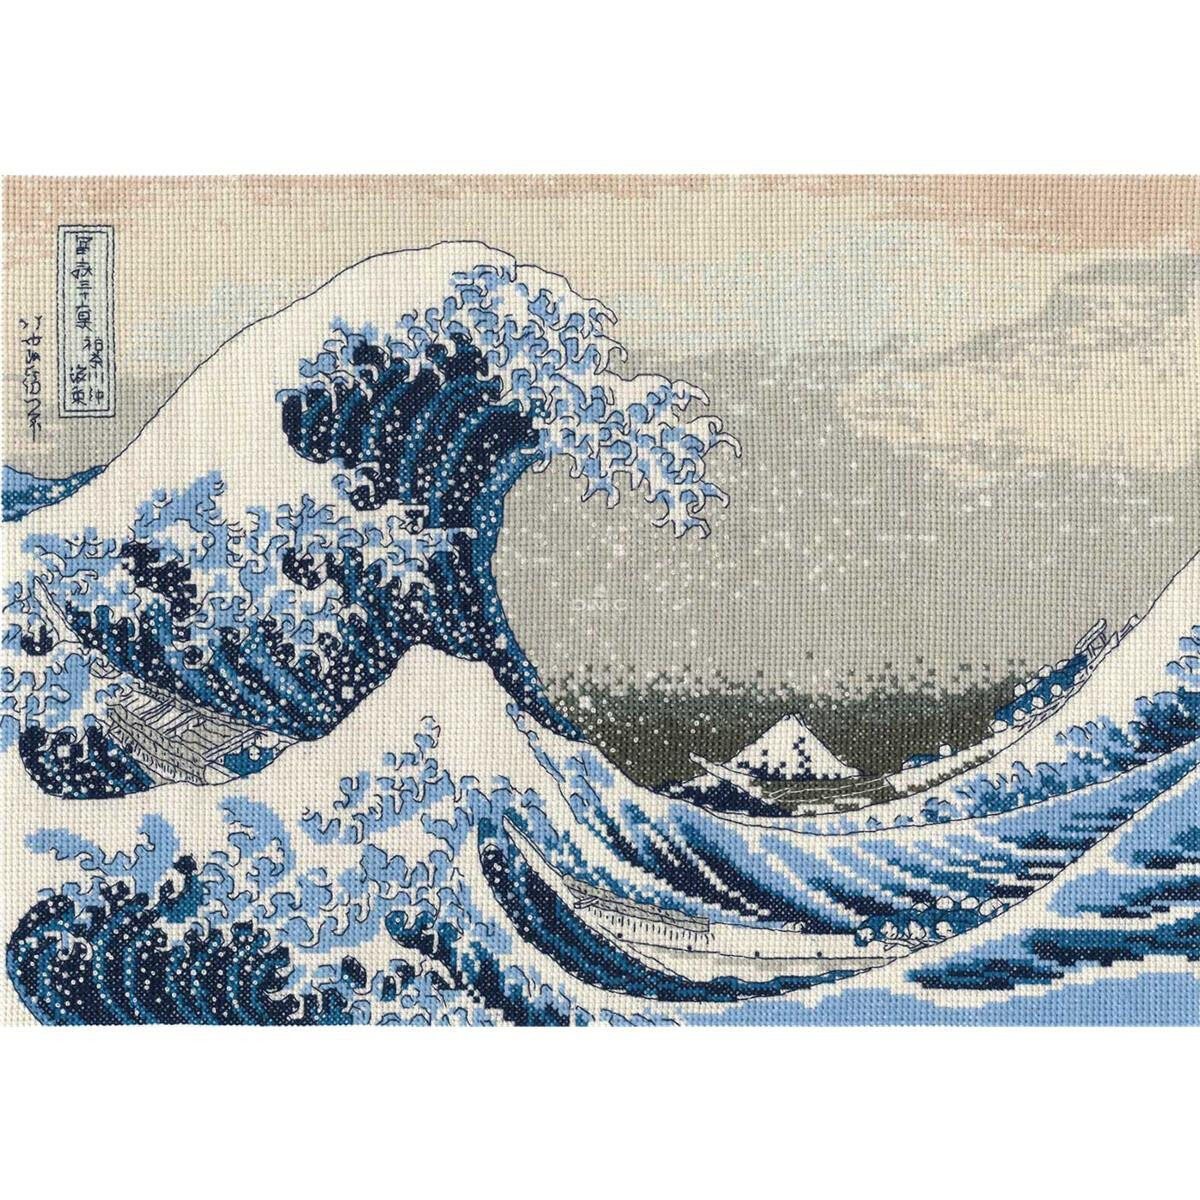 DMC counted Cross Stitch kit "The Great Wave"...